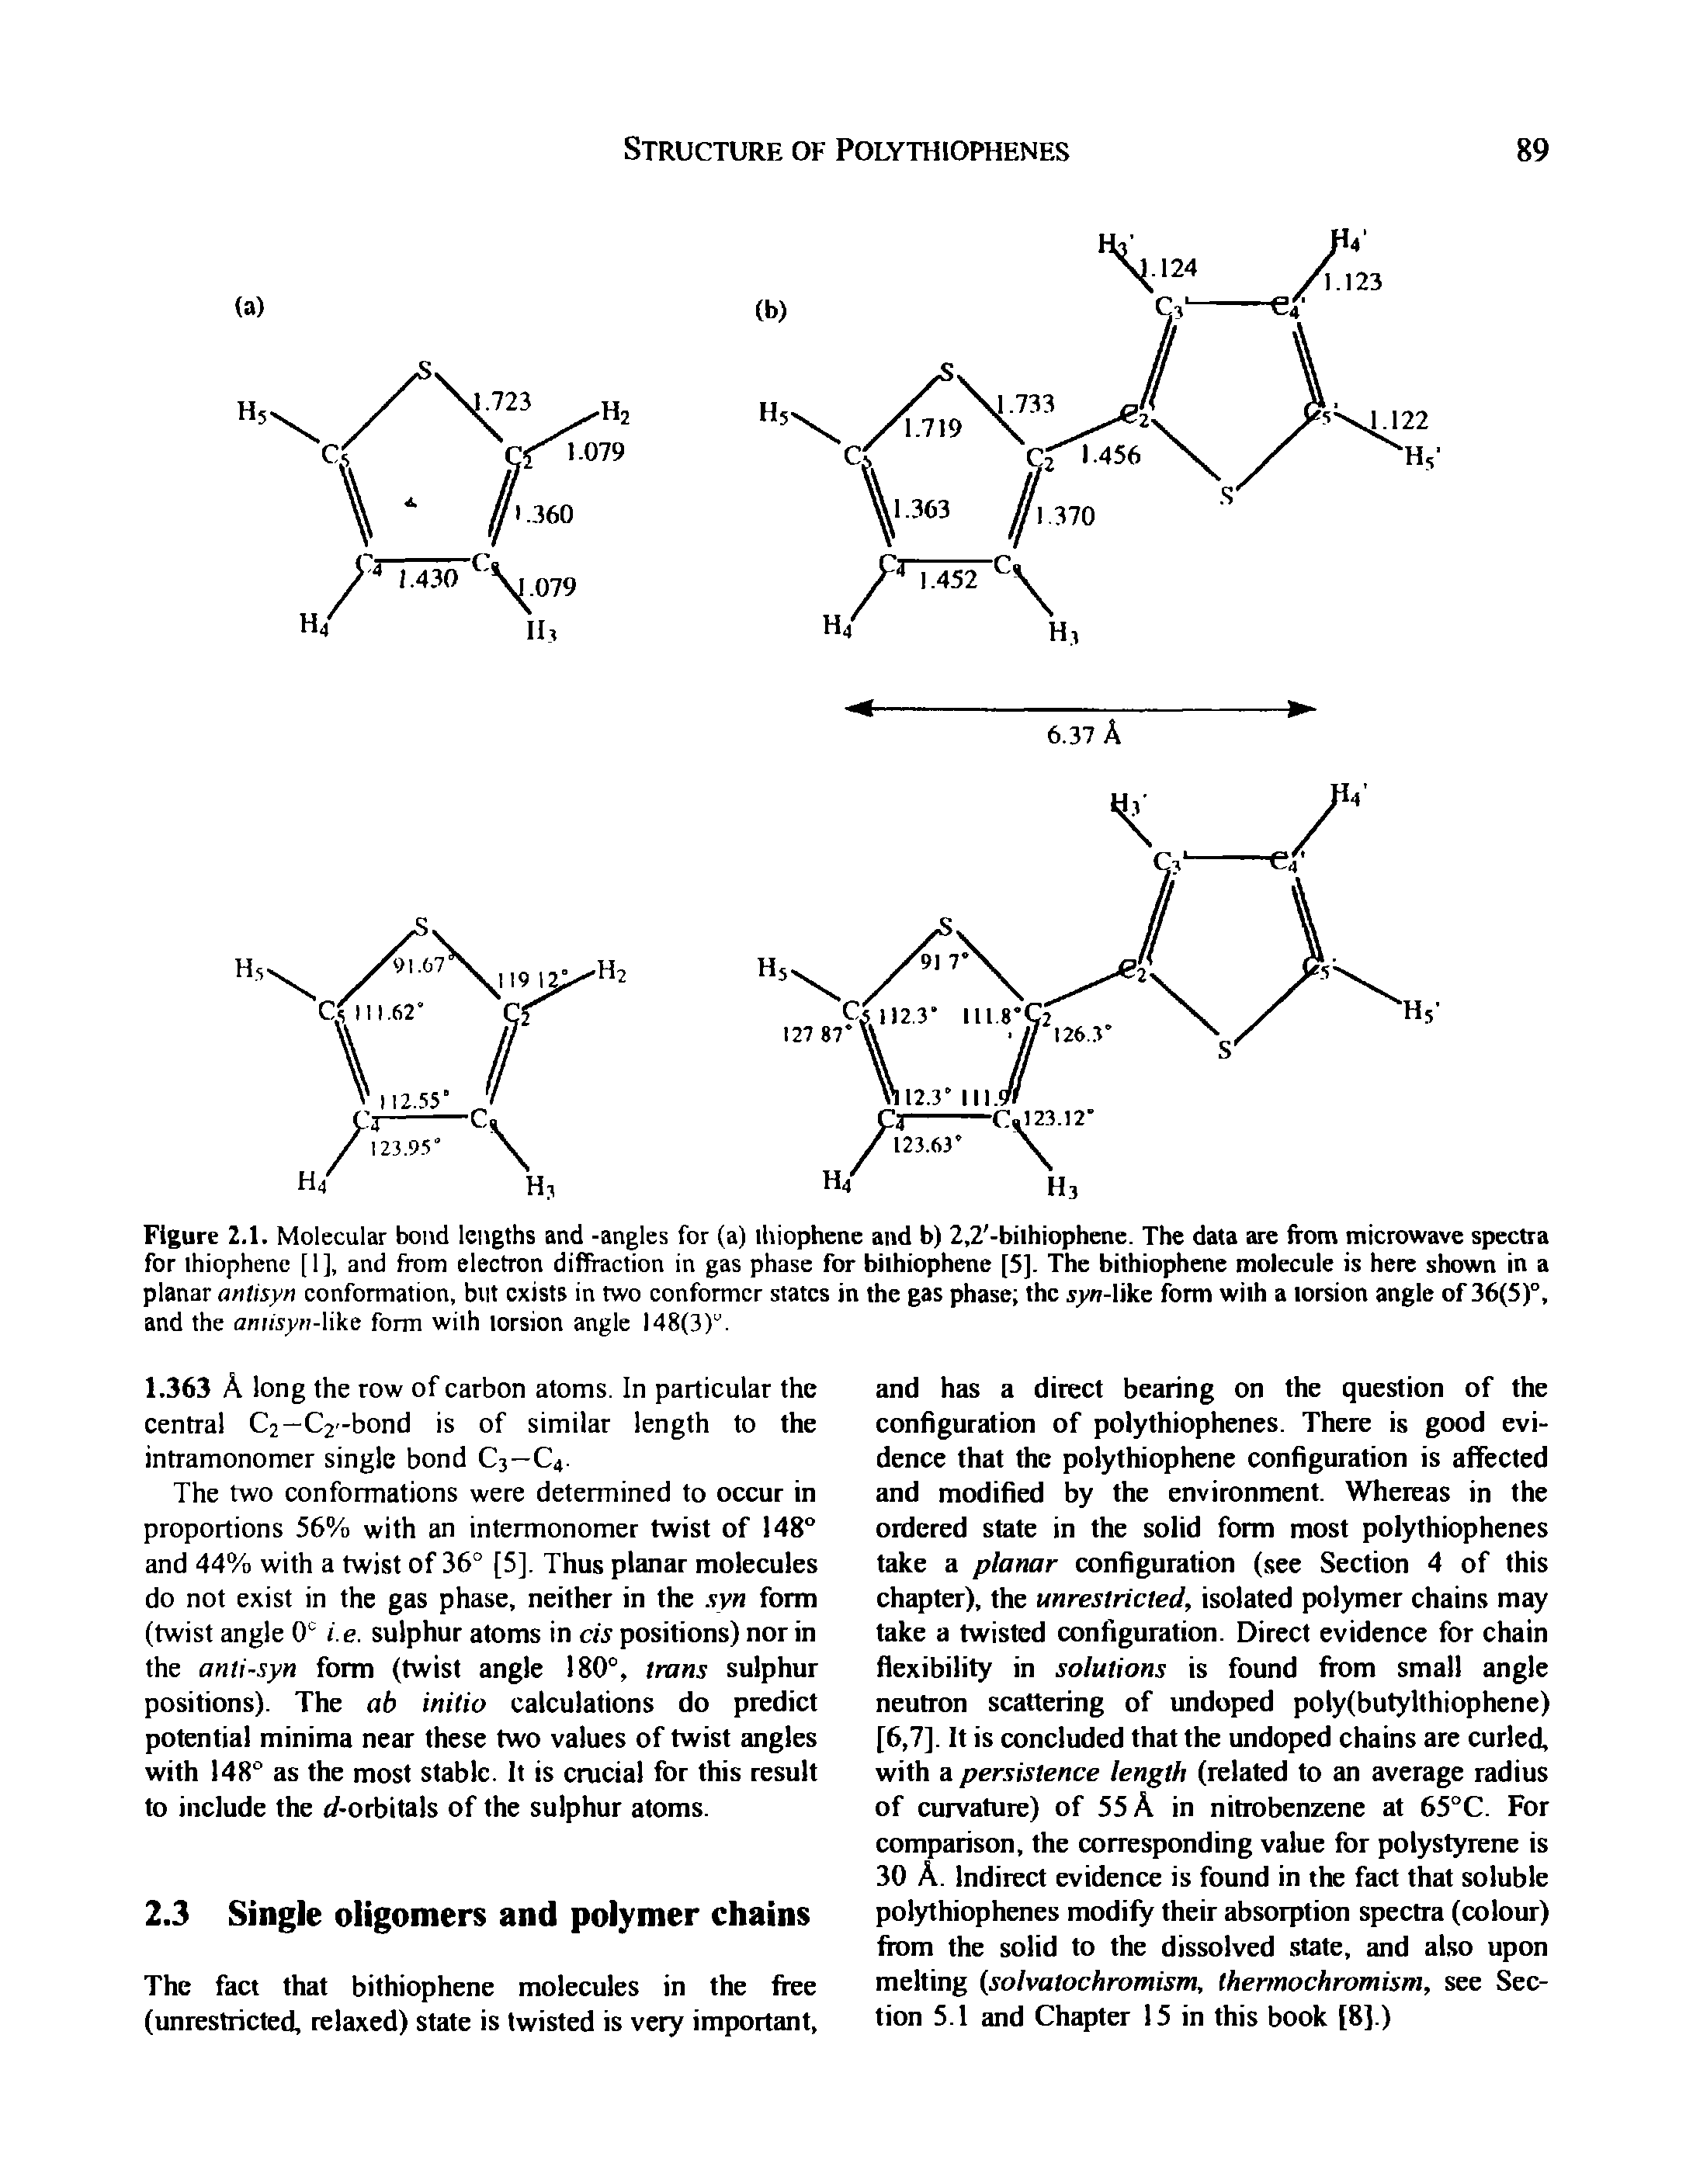 Figure 2.1. Molecular bond lengths and -angles for (a) thiophene and b) 2,2 -bilhiophene. The data are from microwave spectra for thiophene [1], and ifom electron diffraction in gas phase for bithiophene [5]. The bithiophene molecule is here shown in a planar antisyn conformation, but exists in two conformcr states in the gas phase the jyw-like form with a torsion angle of 36(5)°, and the aniisyn-hke form with torsion angle 148(3)".